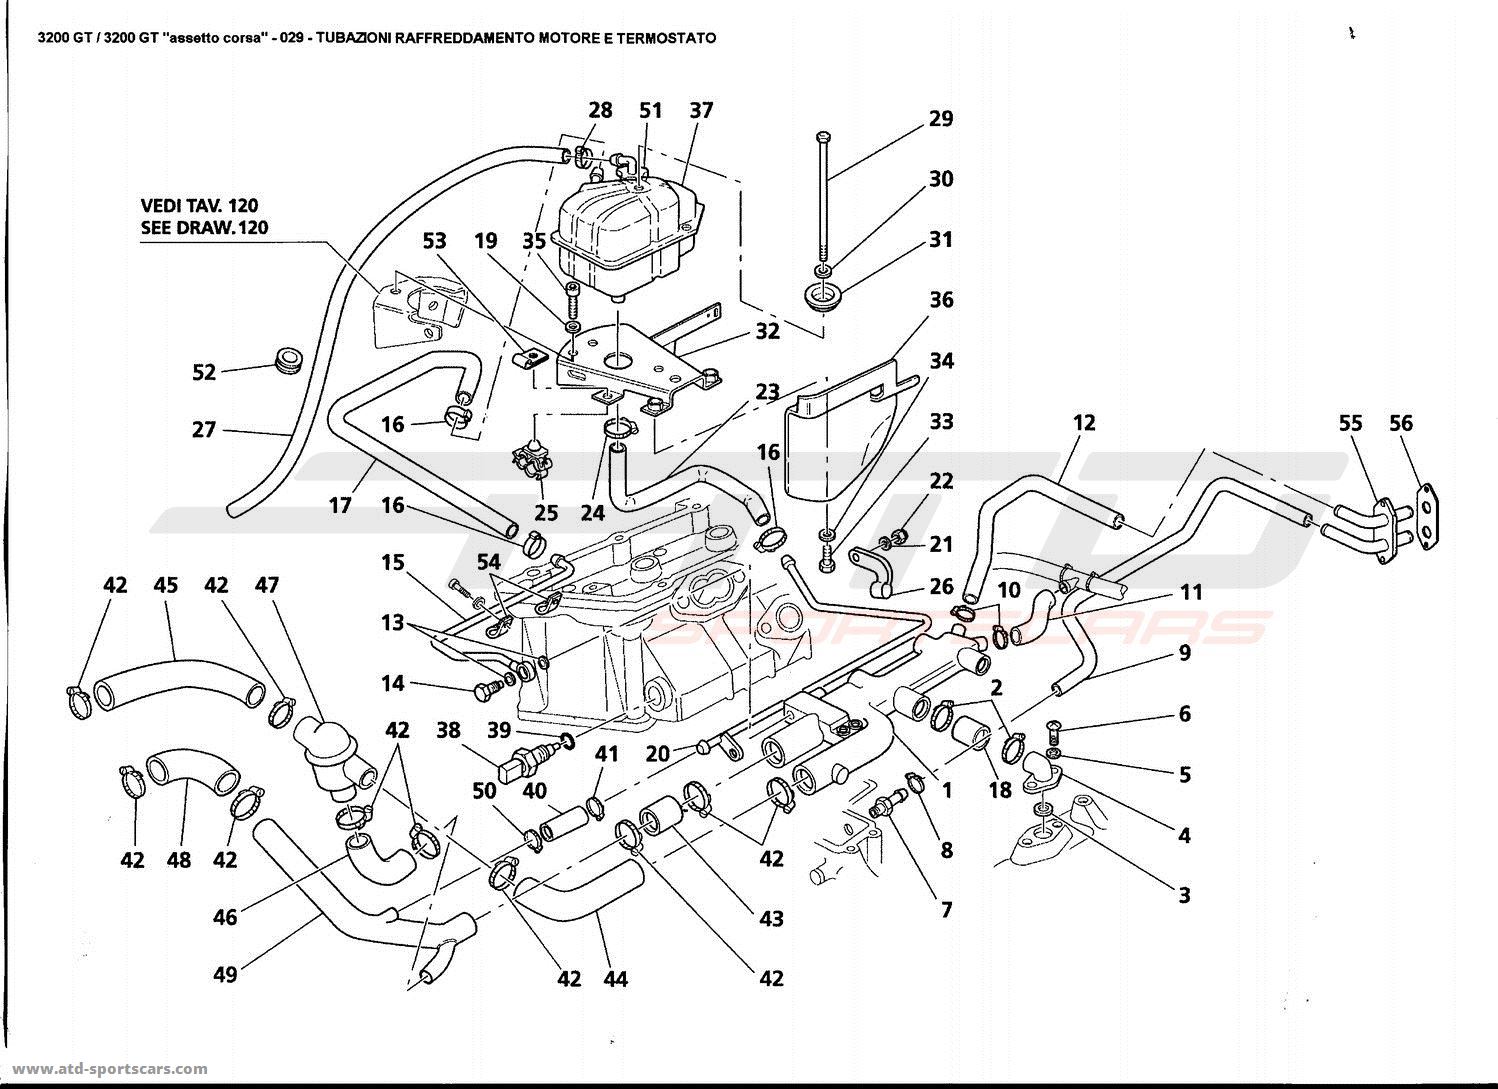 ENGINE COOLING PIPES AND THERMOSTAT